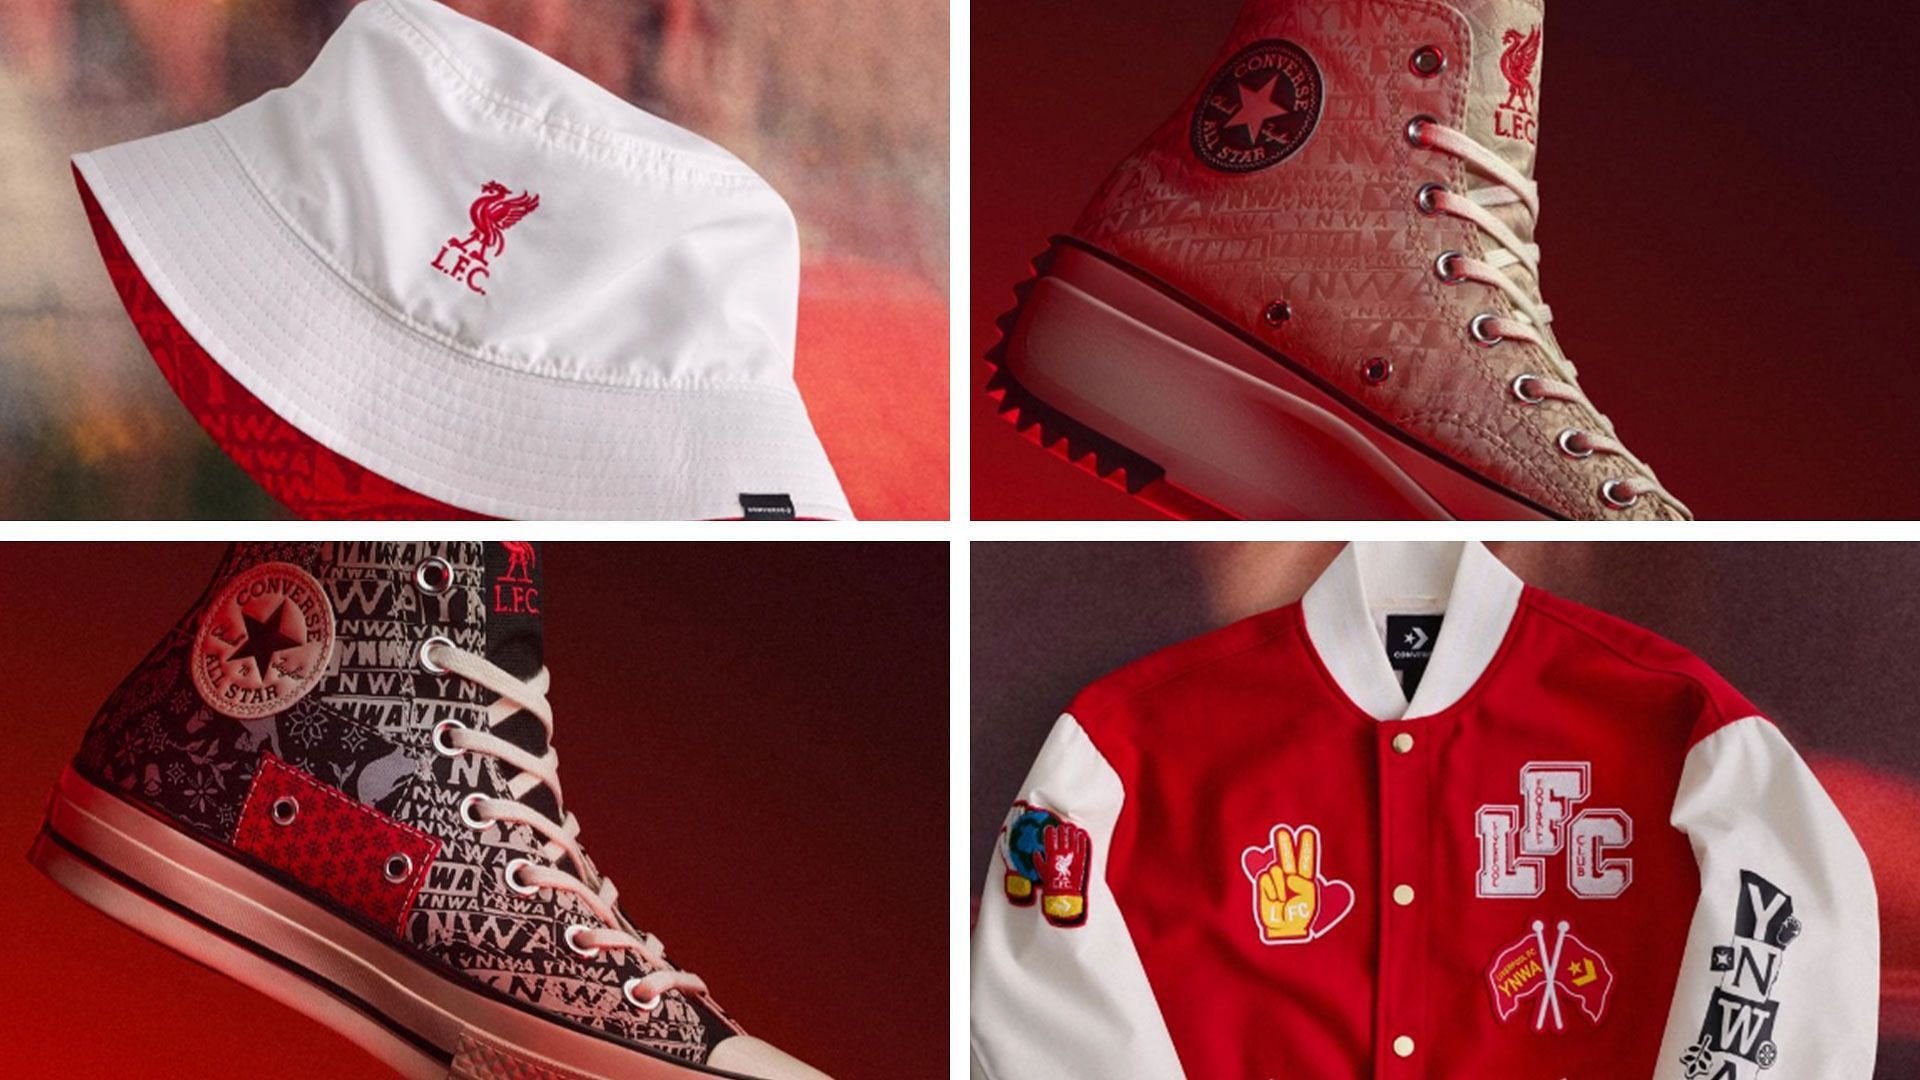 The upcoming Converse x Liverpool FC collab features apparel and footwear items (Image via Sportskeeda)